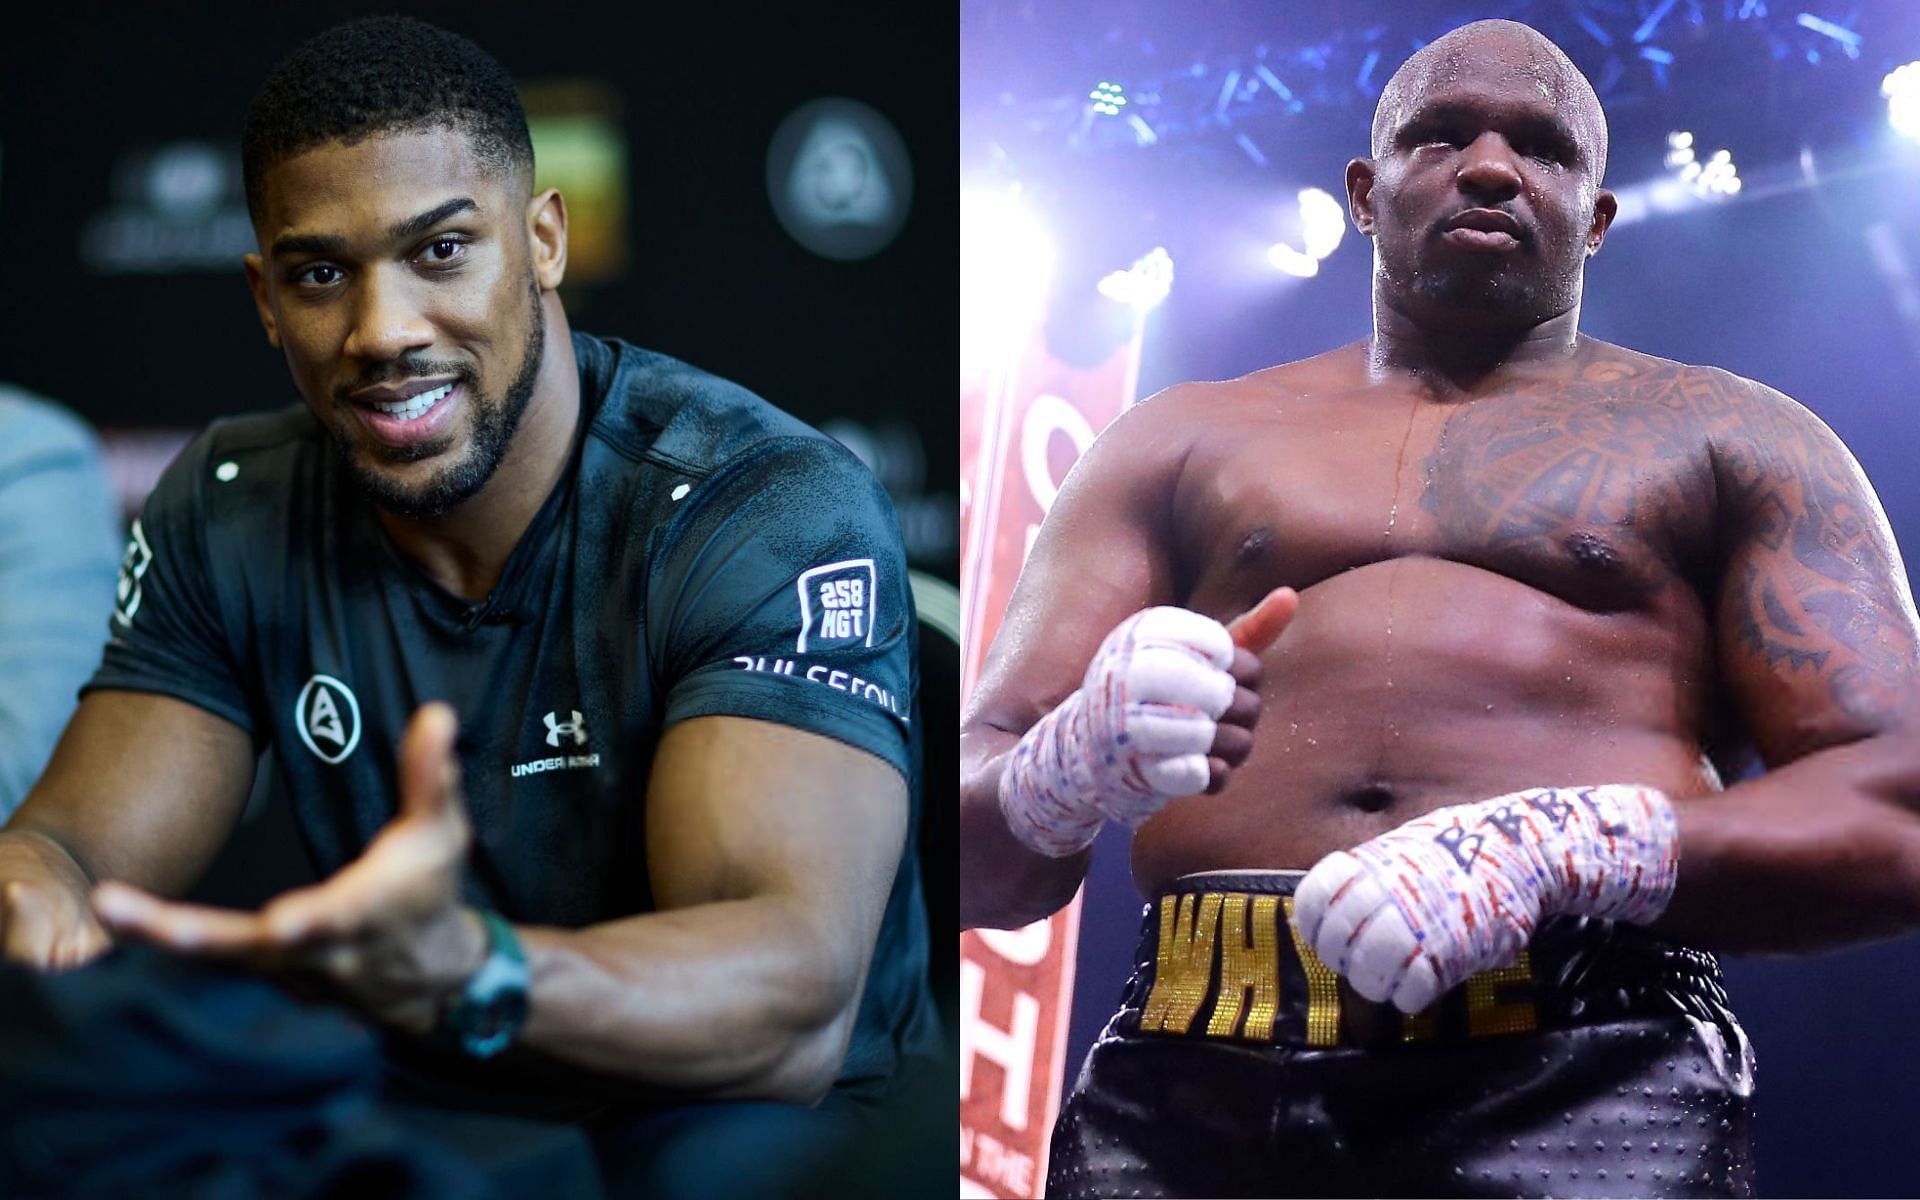 Anthony Joshua (left) and Dillian Whyte (right) [Images Courtesy: @GettyImages]